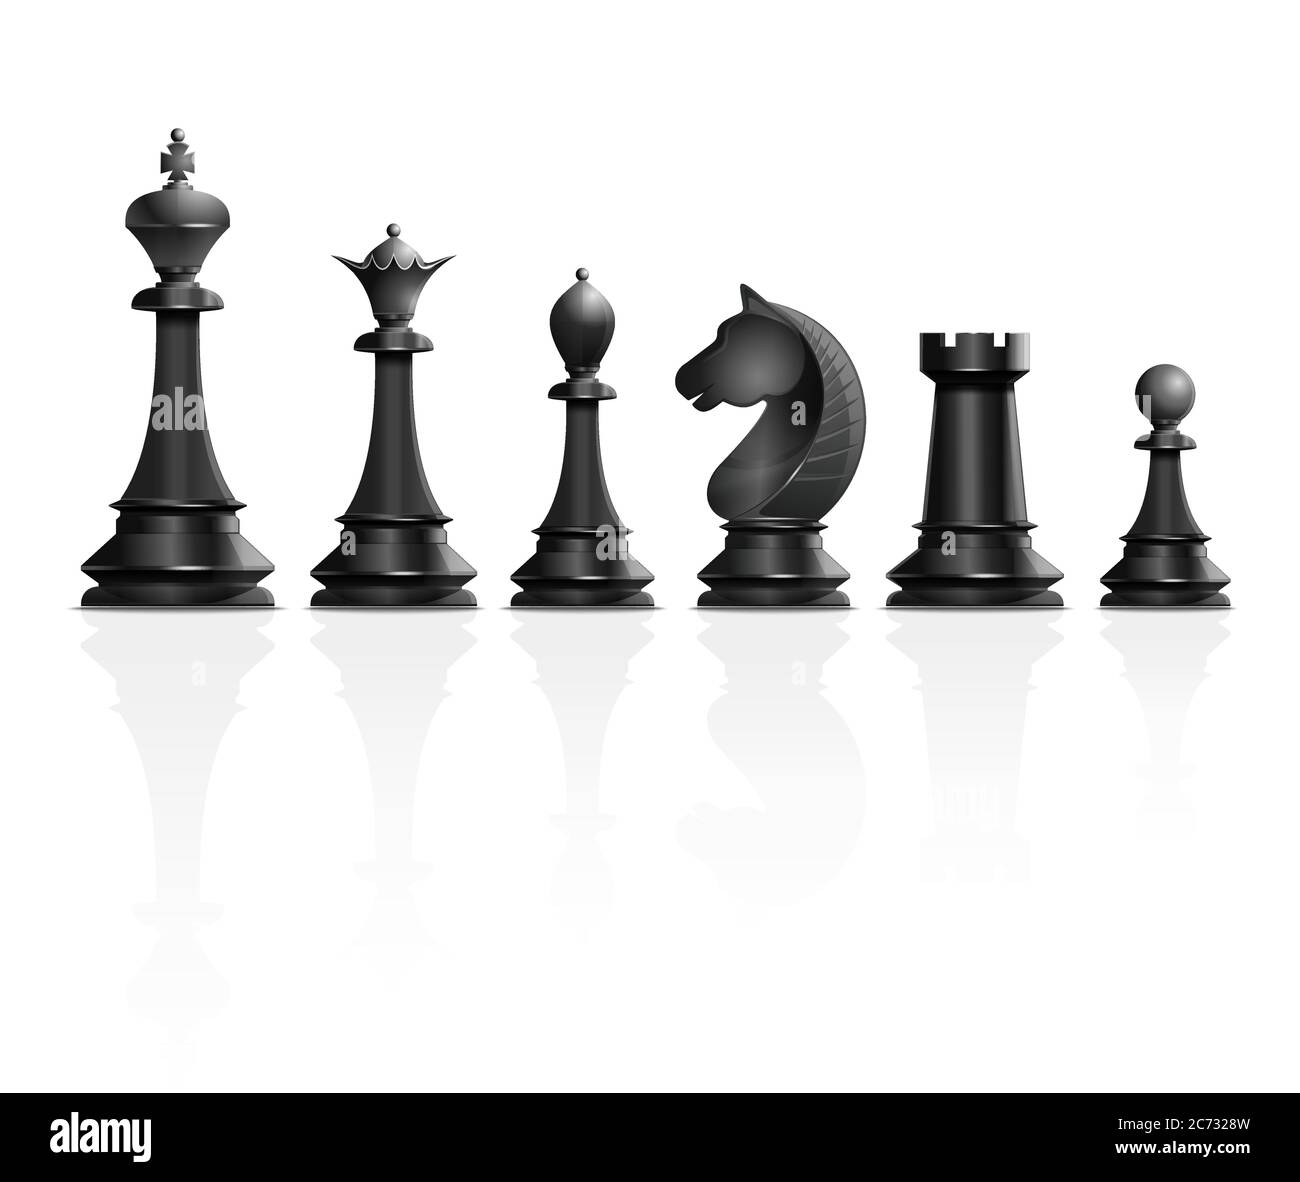 Two Rows Of Chess Pieces High-Res Vector Graphic - Getty Images